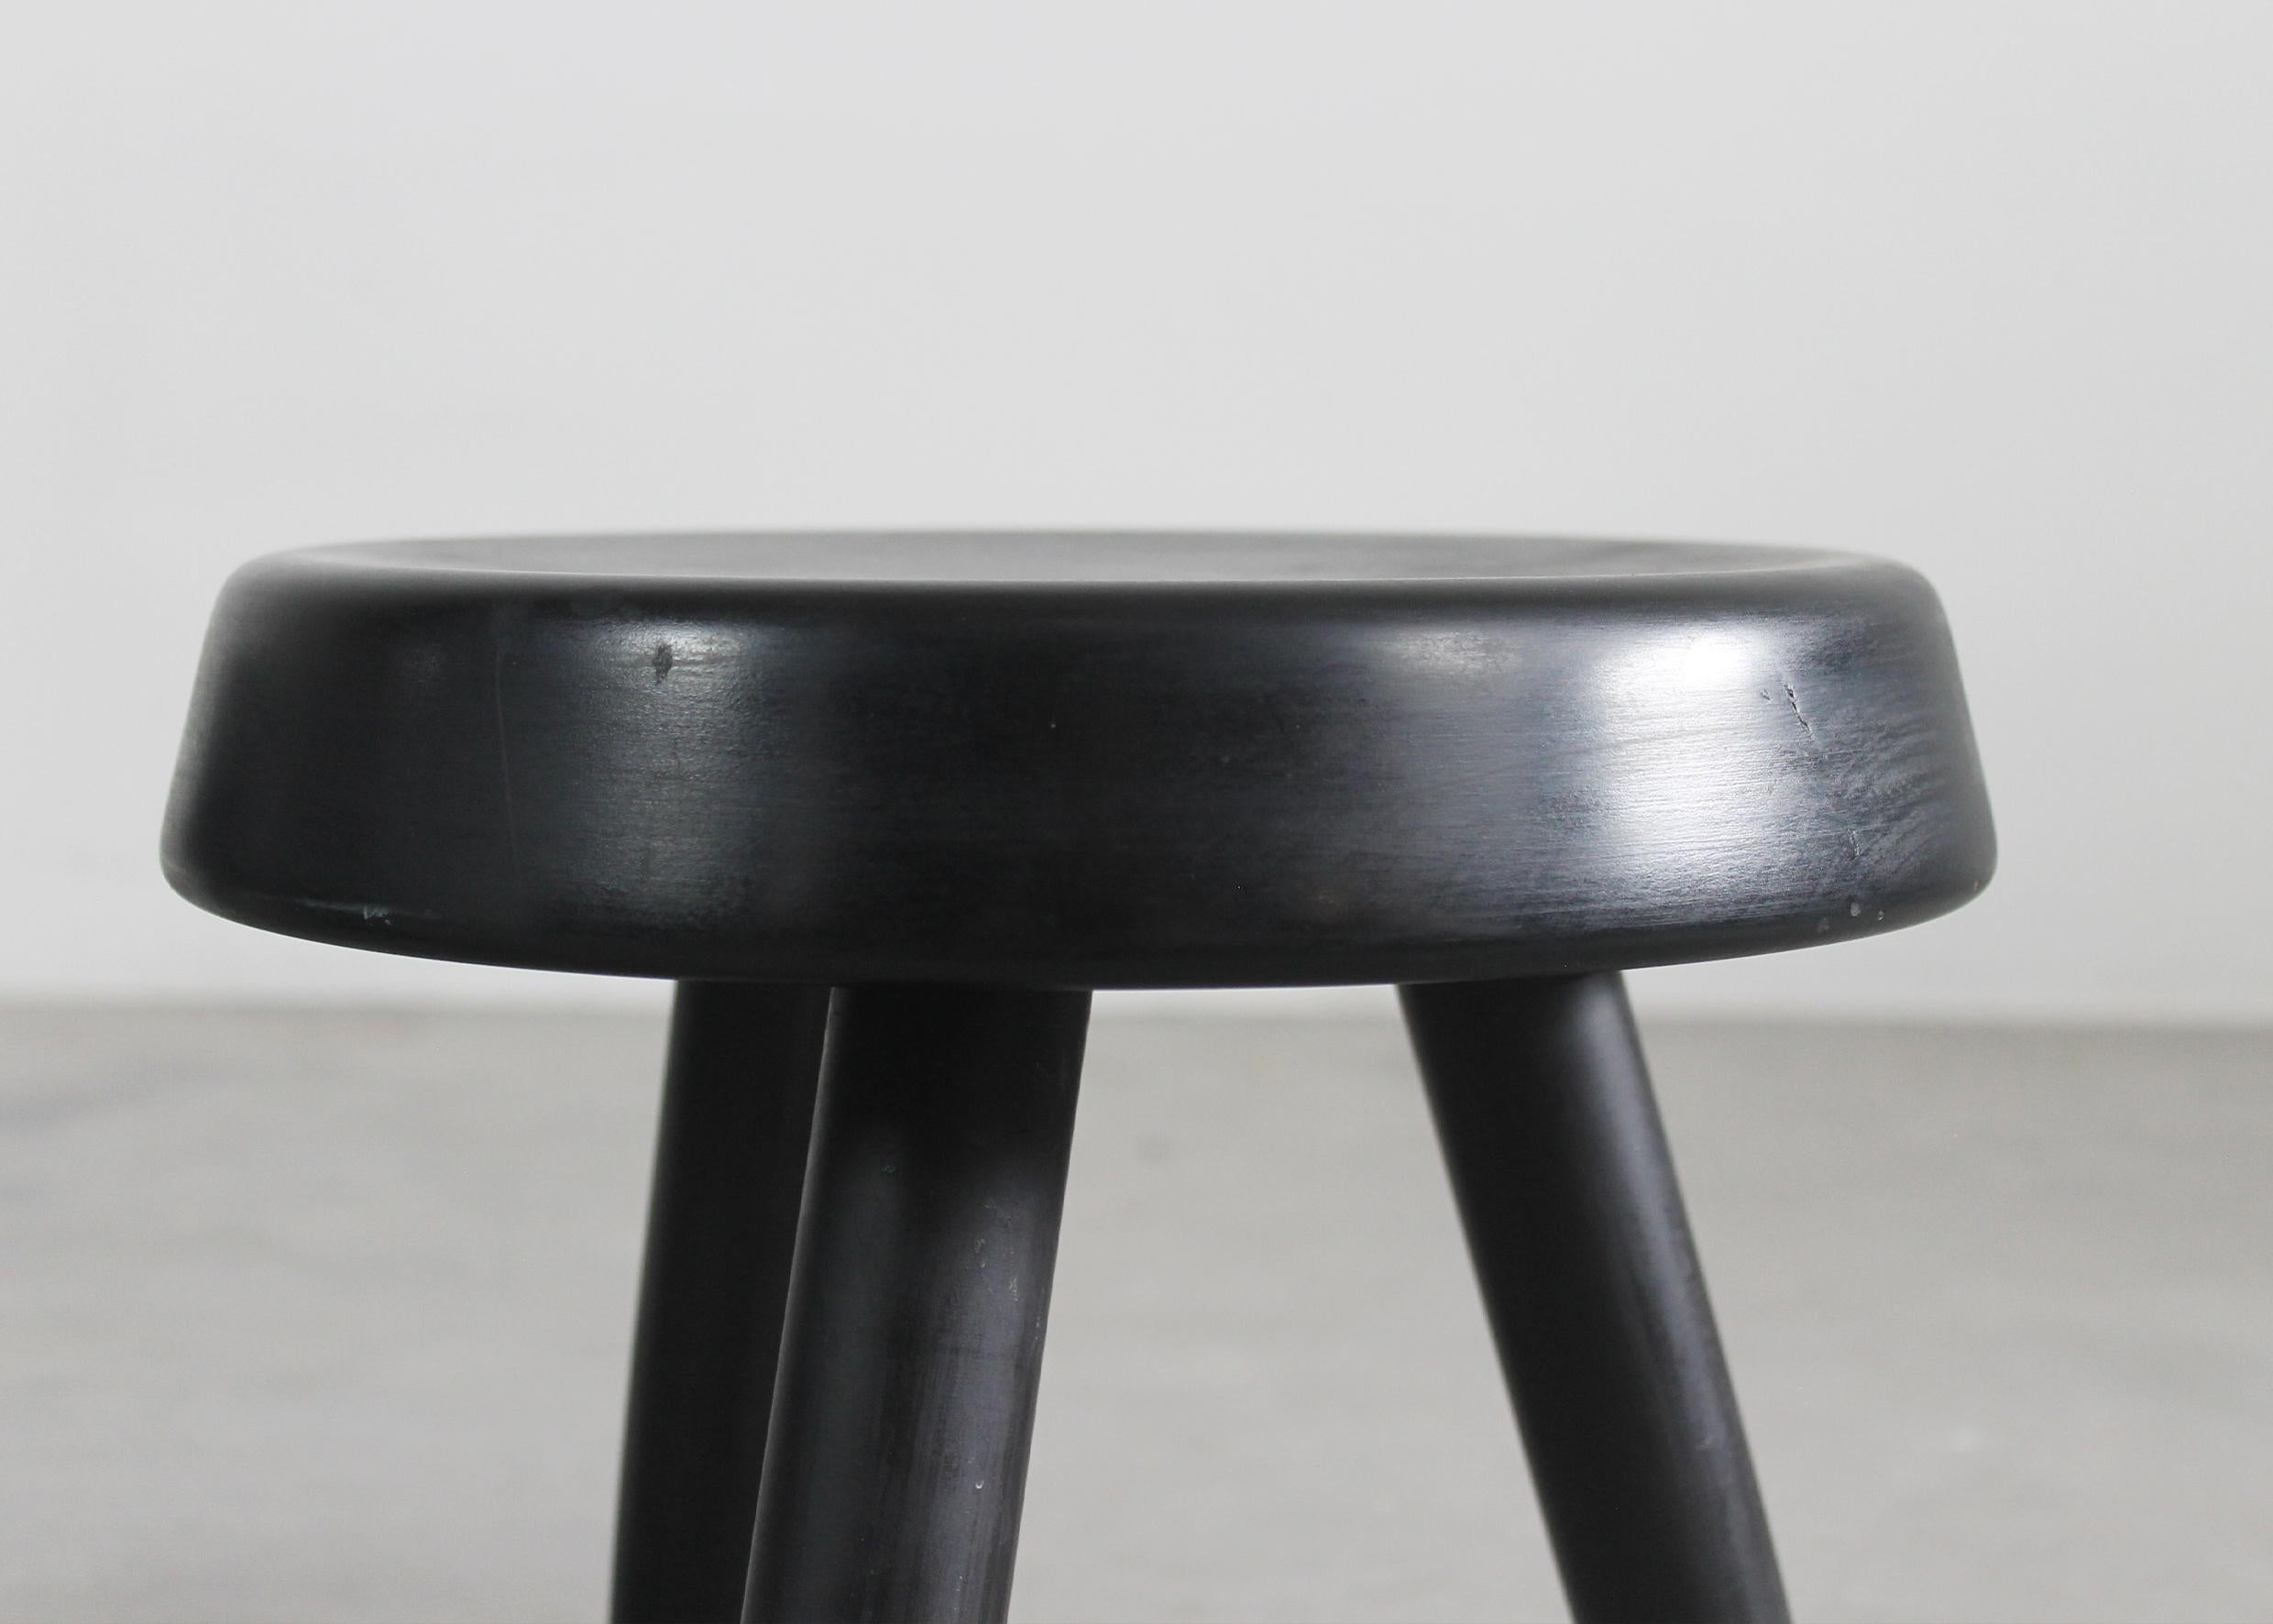 European Set of Two Black Stools in the Style of Charlotte Perriand in Wood 1950s For Sale